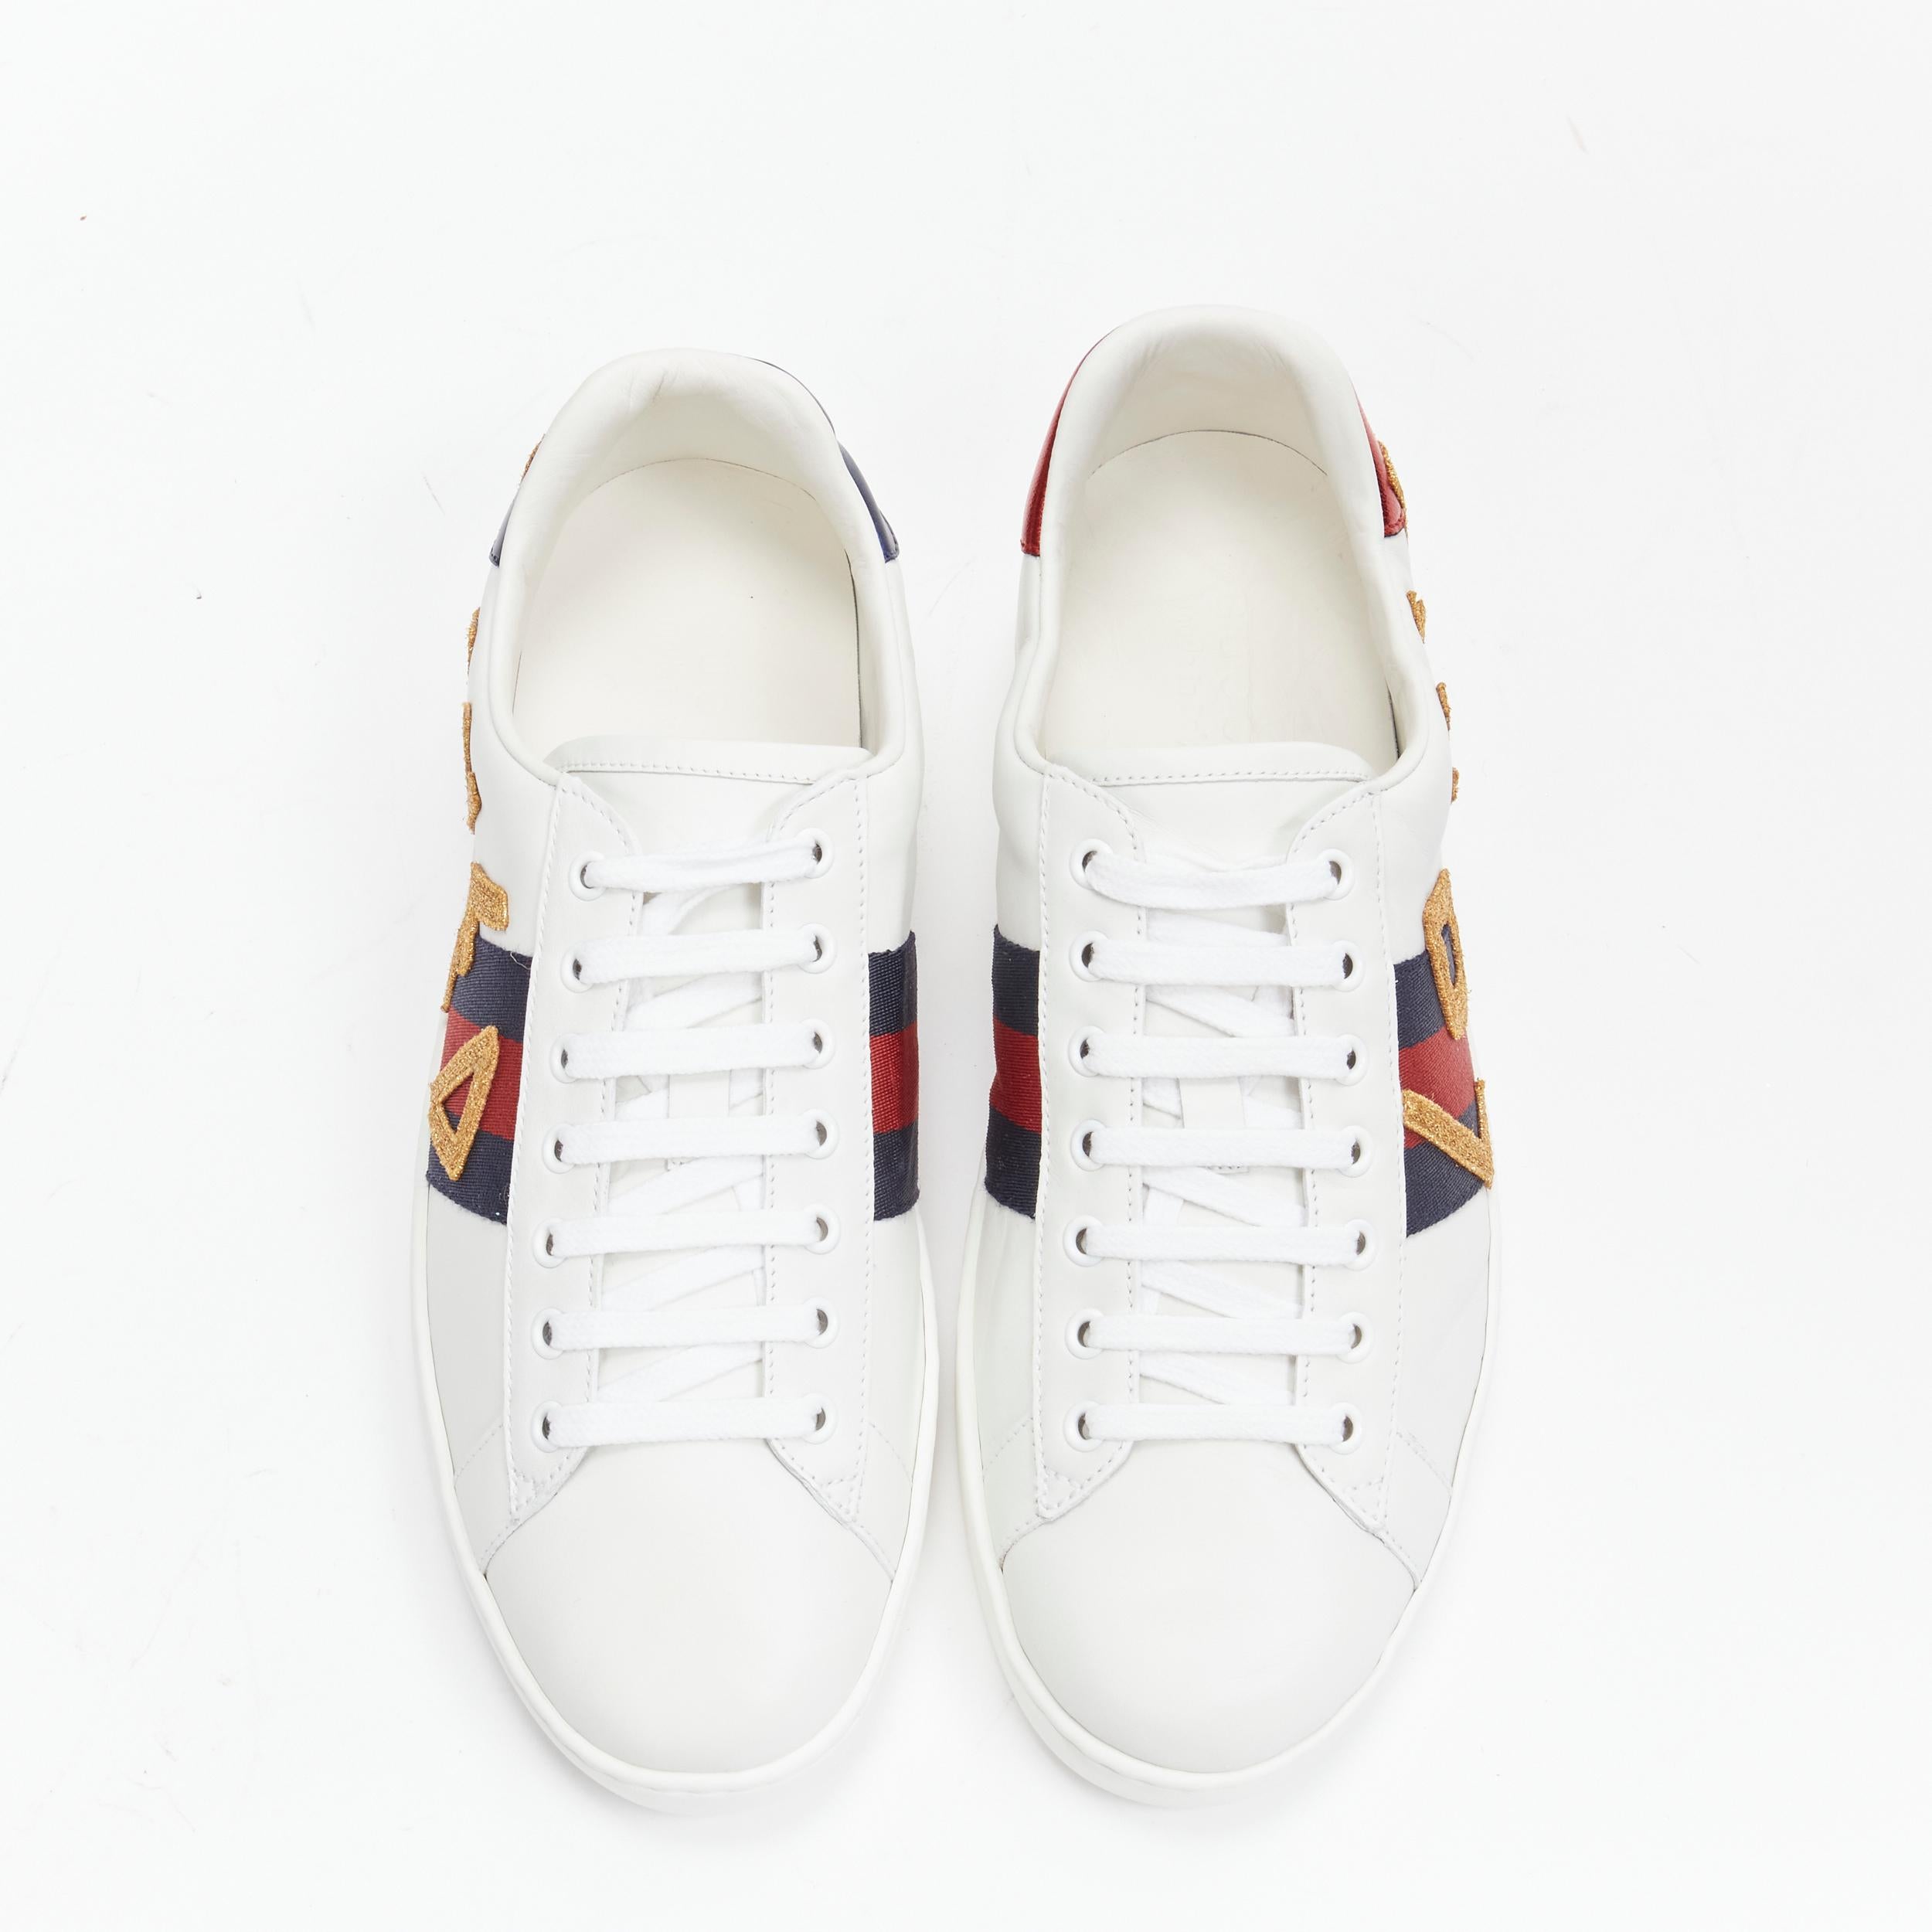 White GUCCI Ace Loved gold letter patchwork white navy red web sneaker UK9 EU43 For Sale